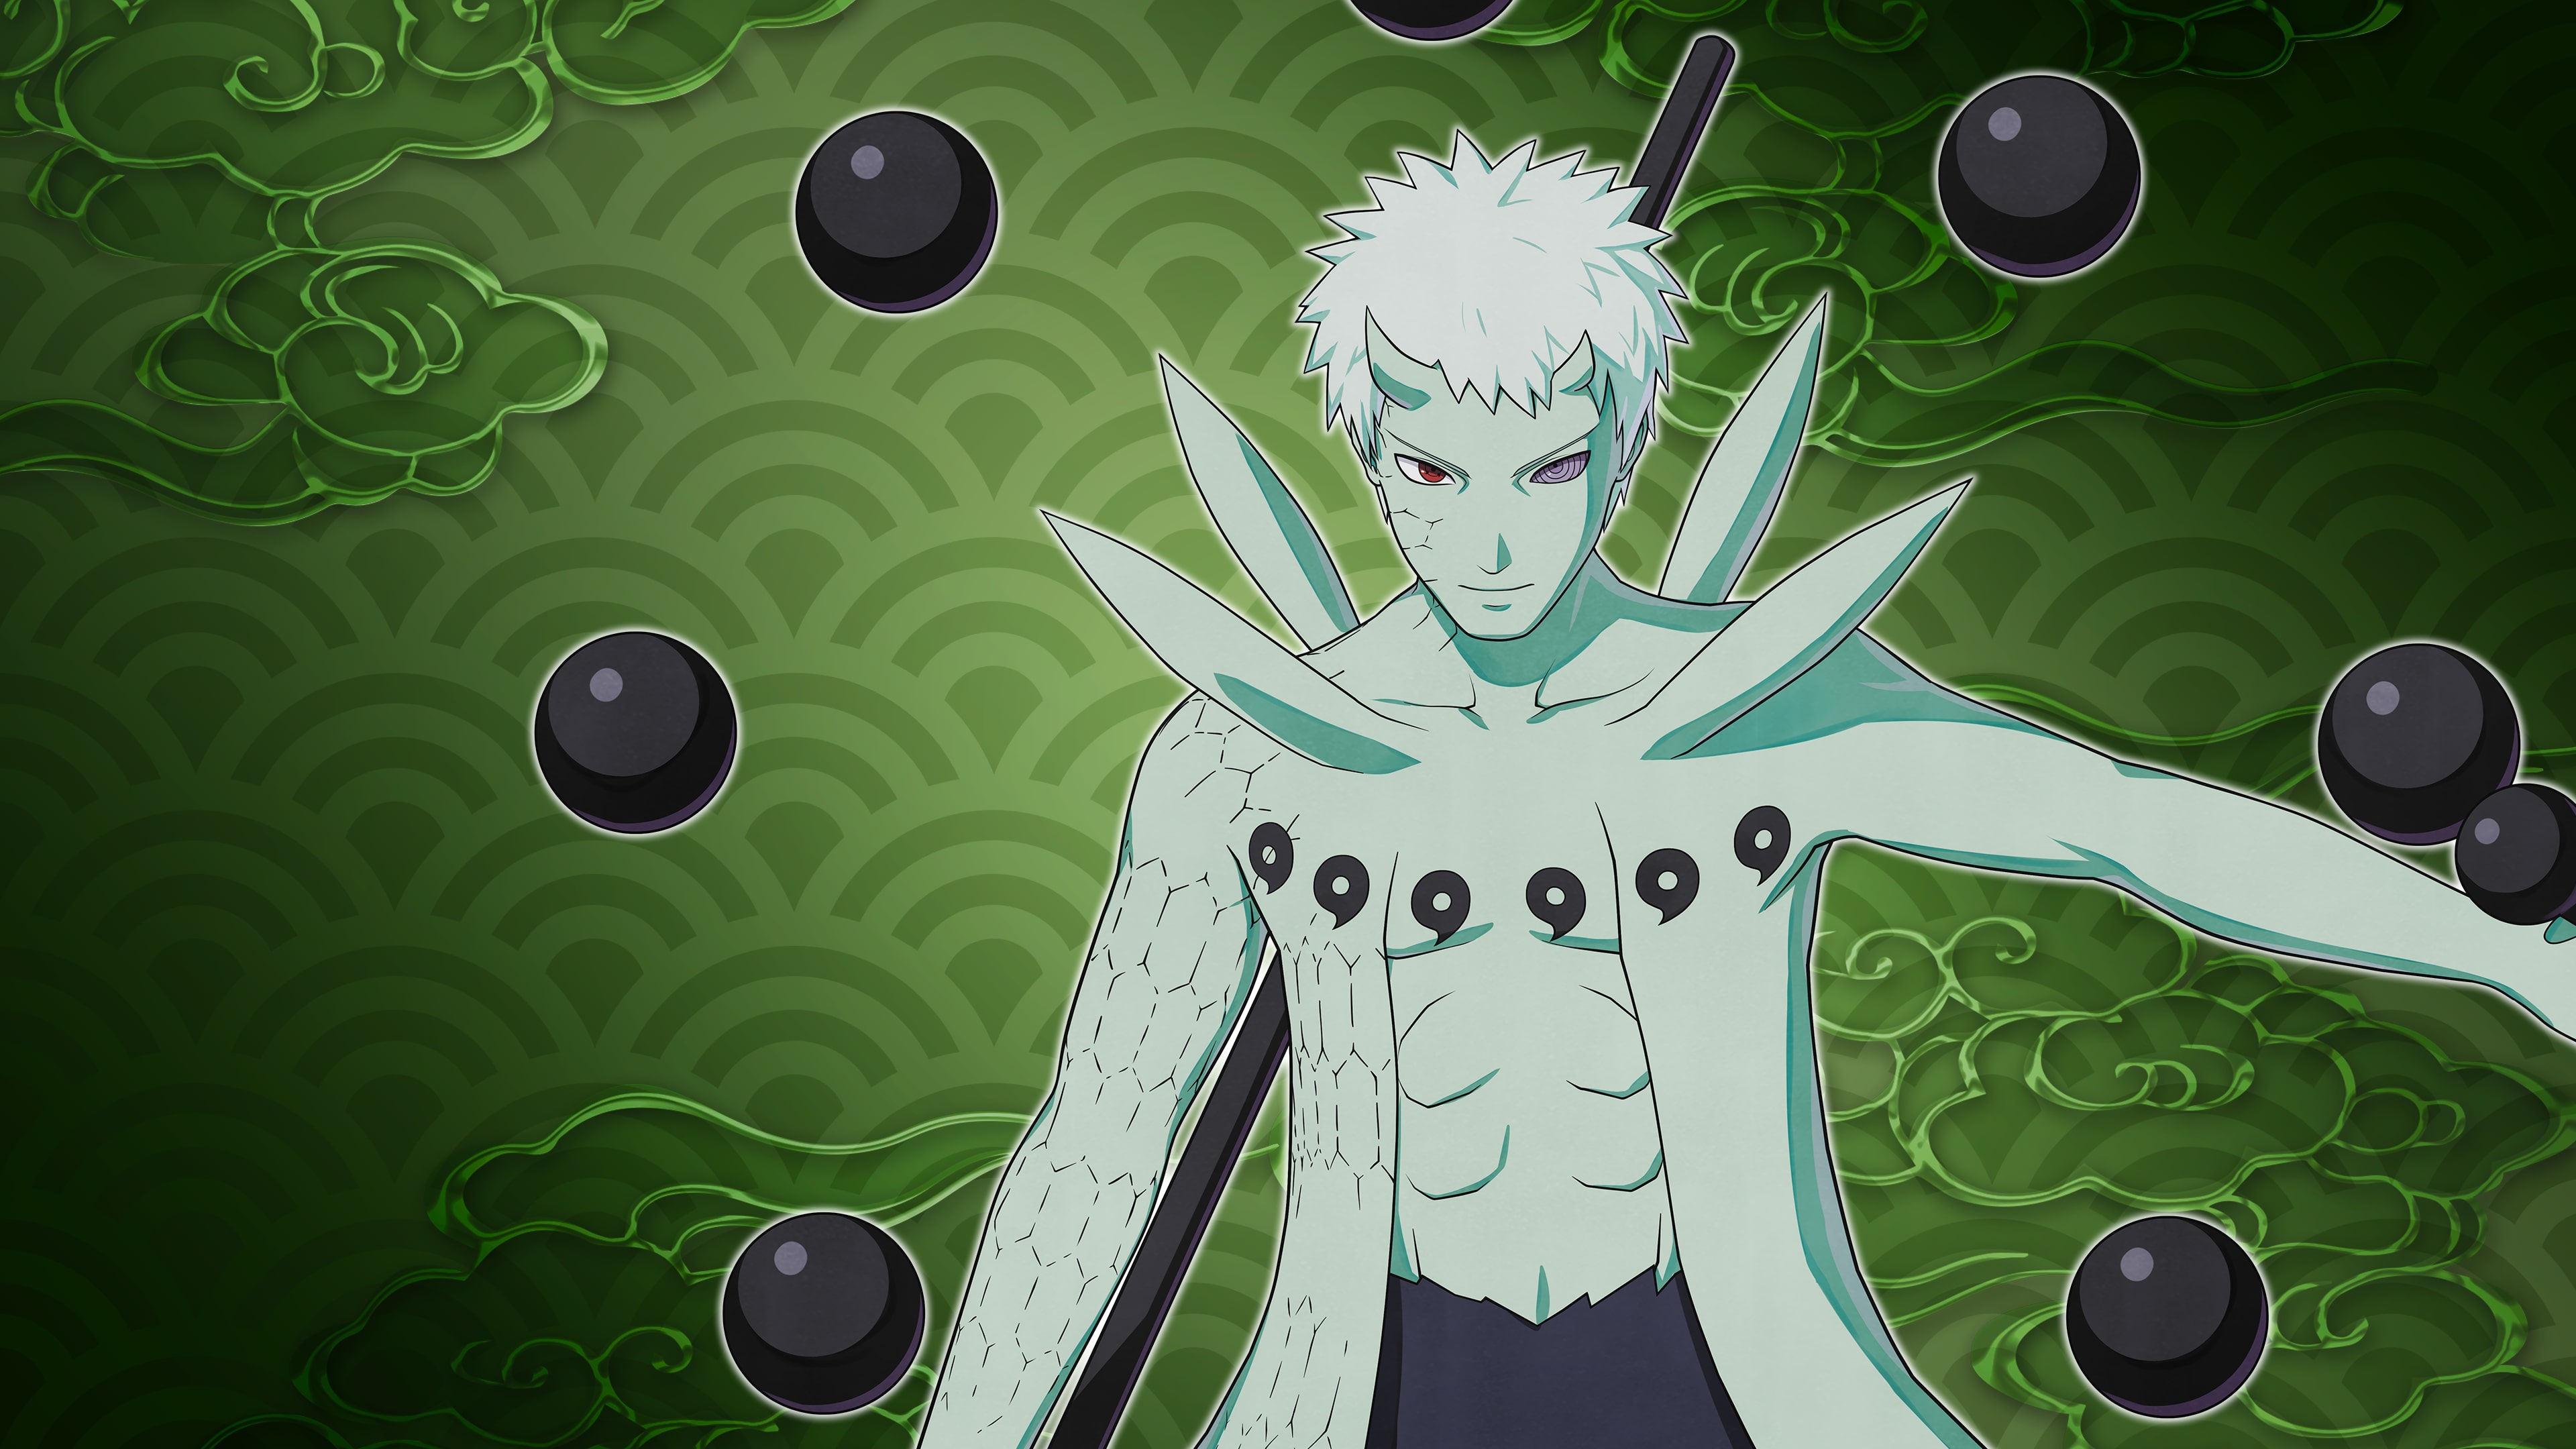 NTBSS: Master Character Training Pack - Obito Uchiha (Ten Tails)